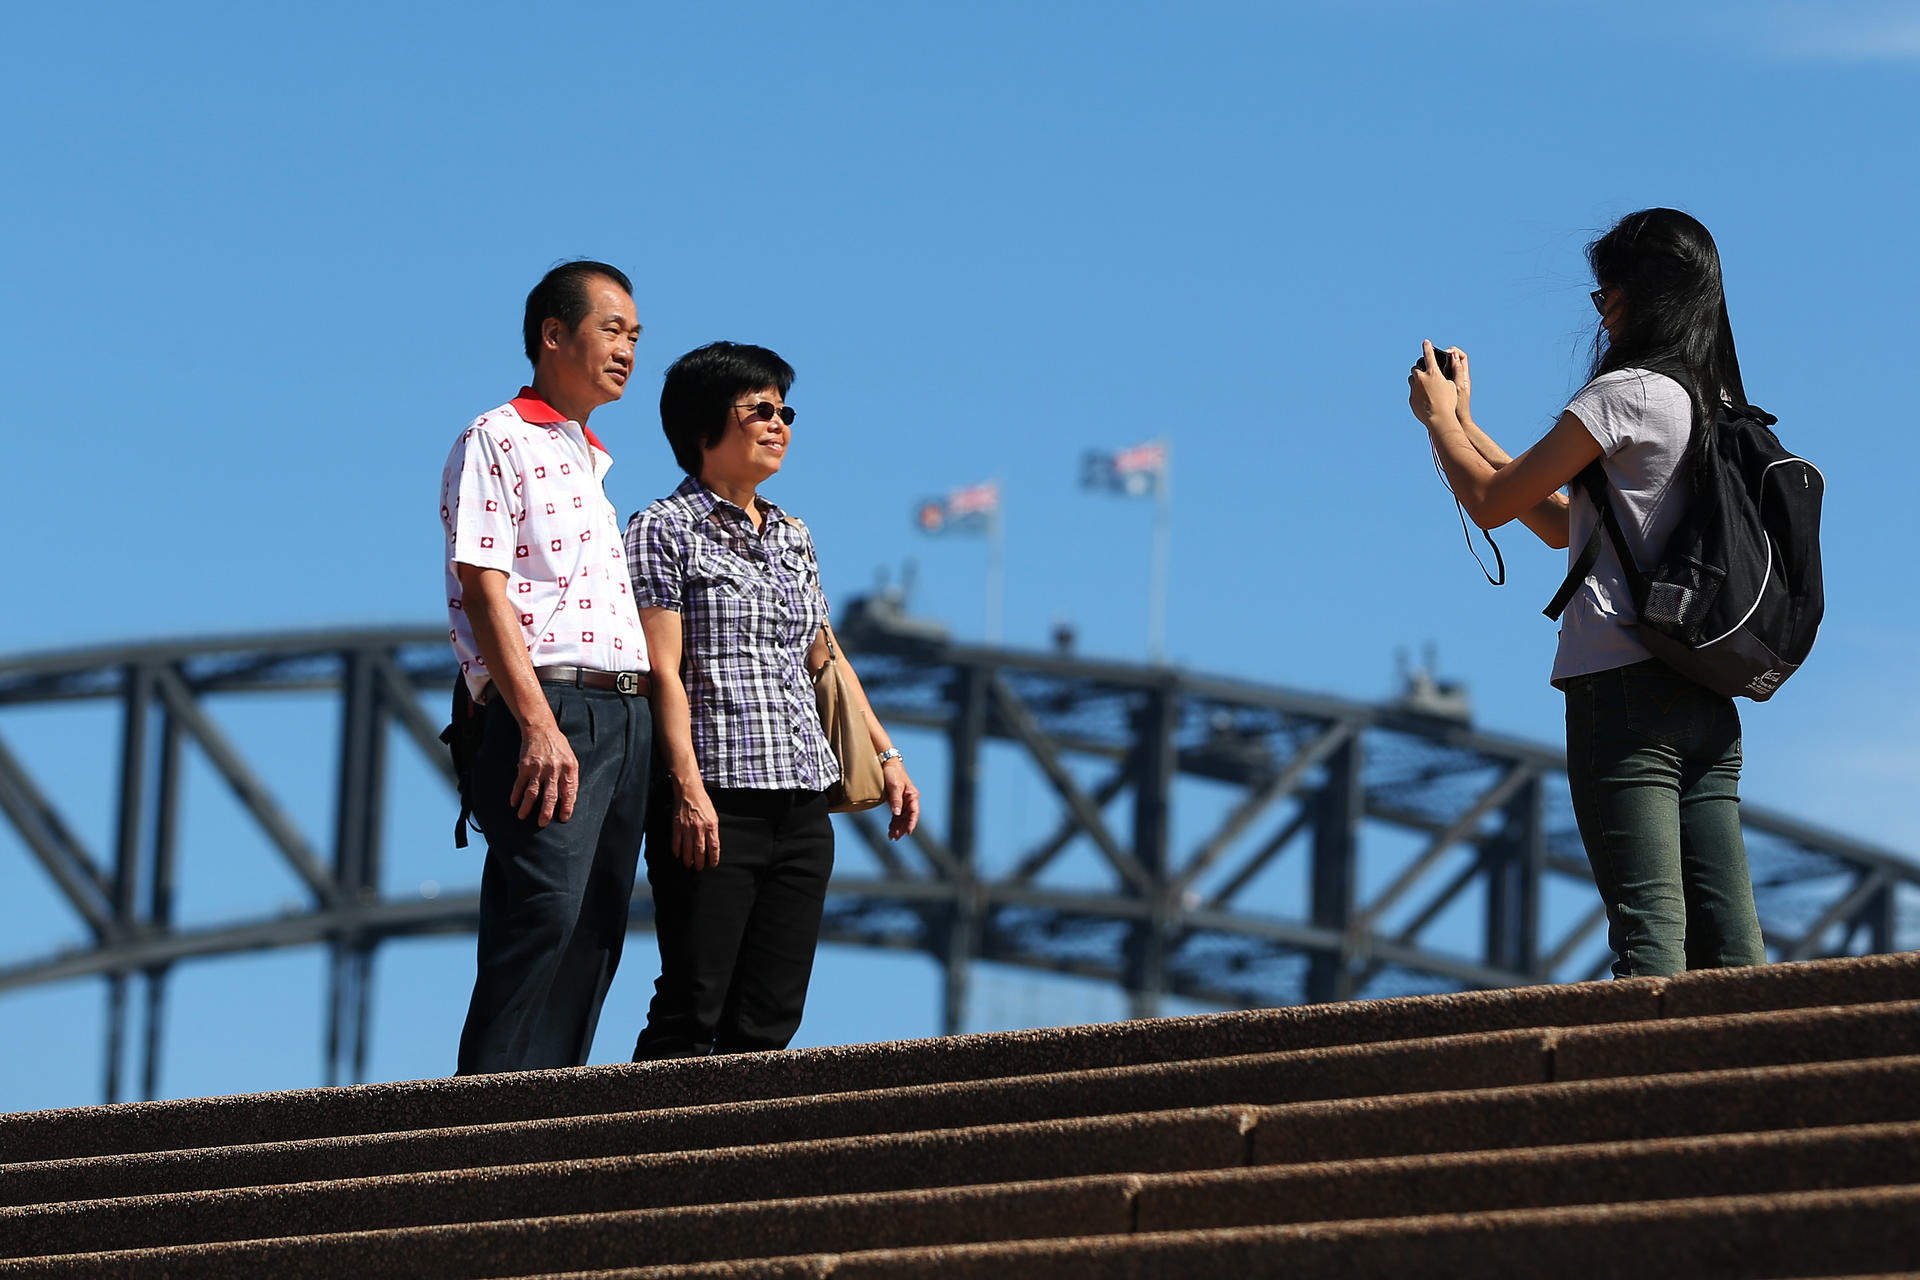 650,000 Chinese visitors travelled to Australia last year. The domestic tourism industy is also growing rapidly. Photo: AP